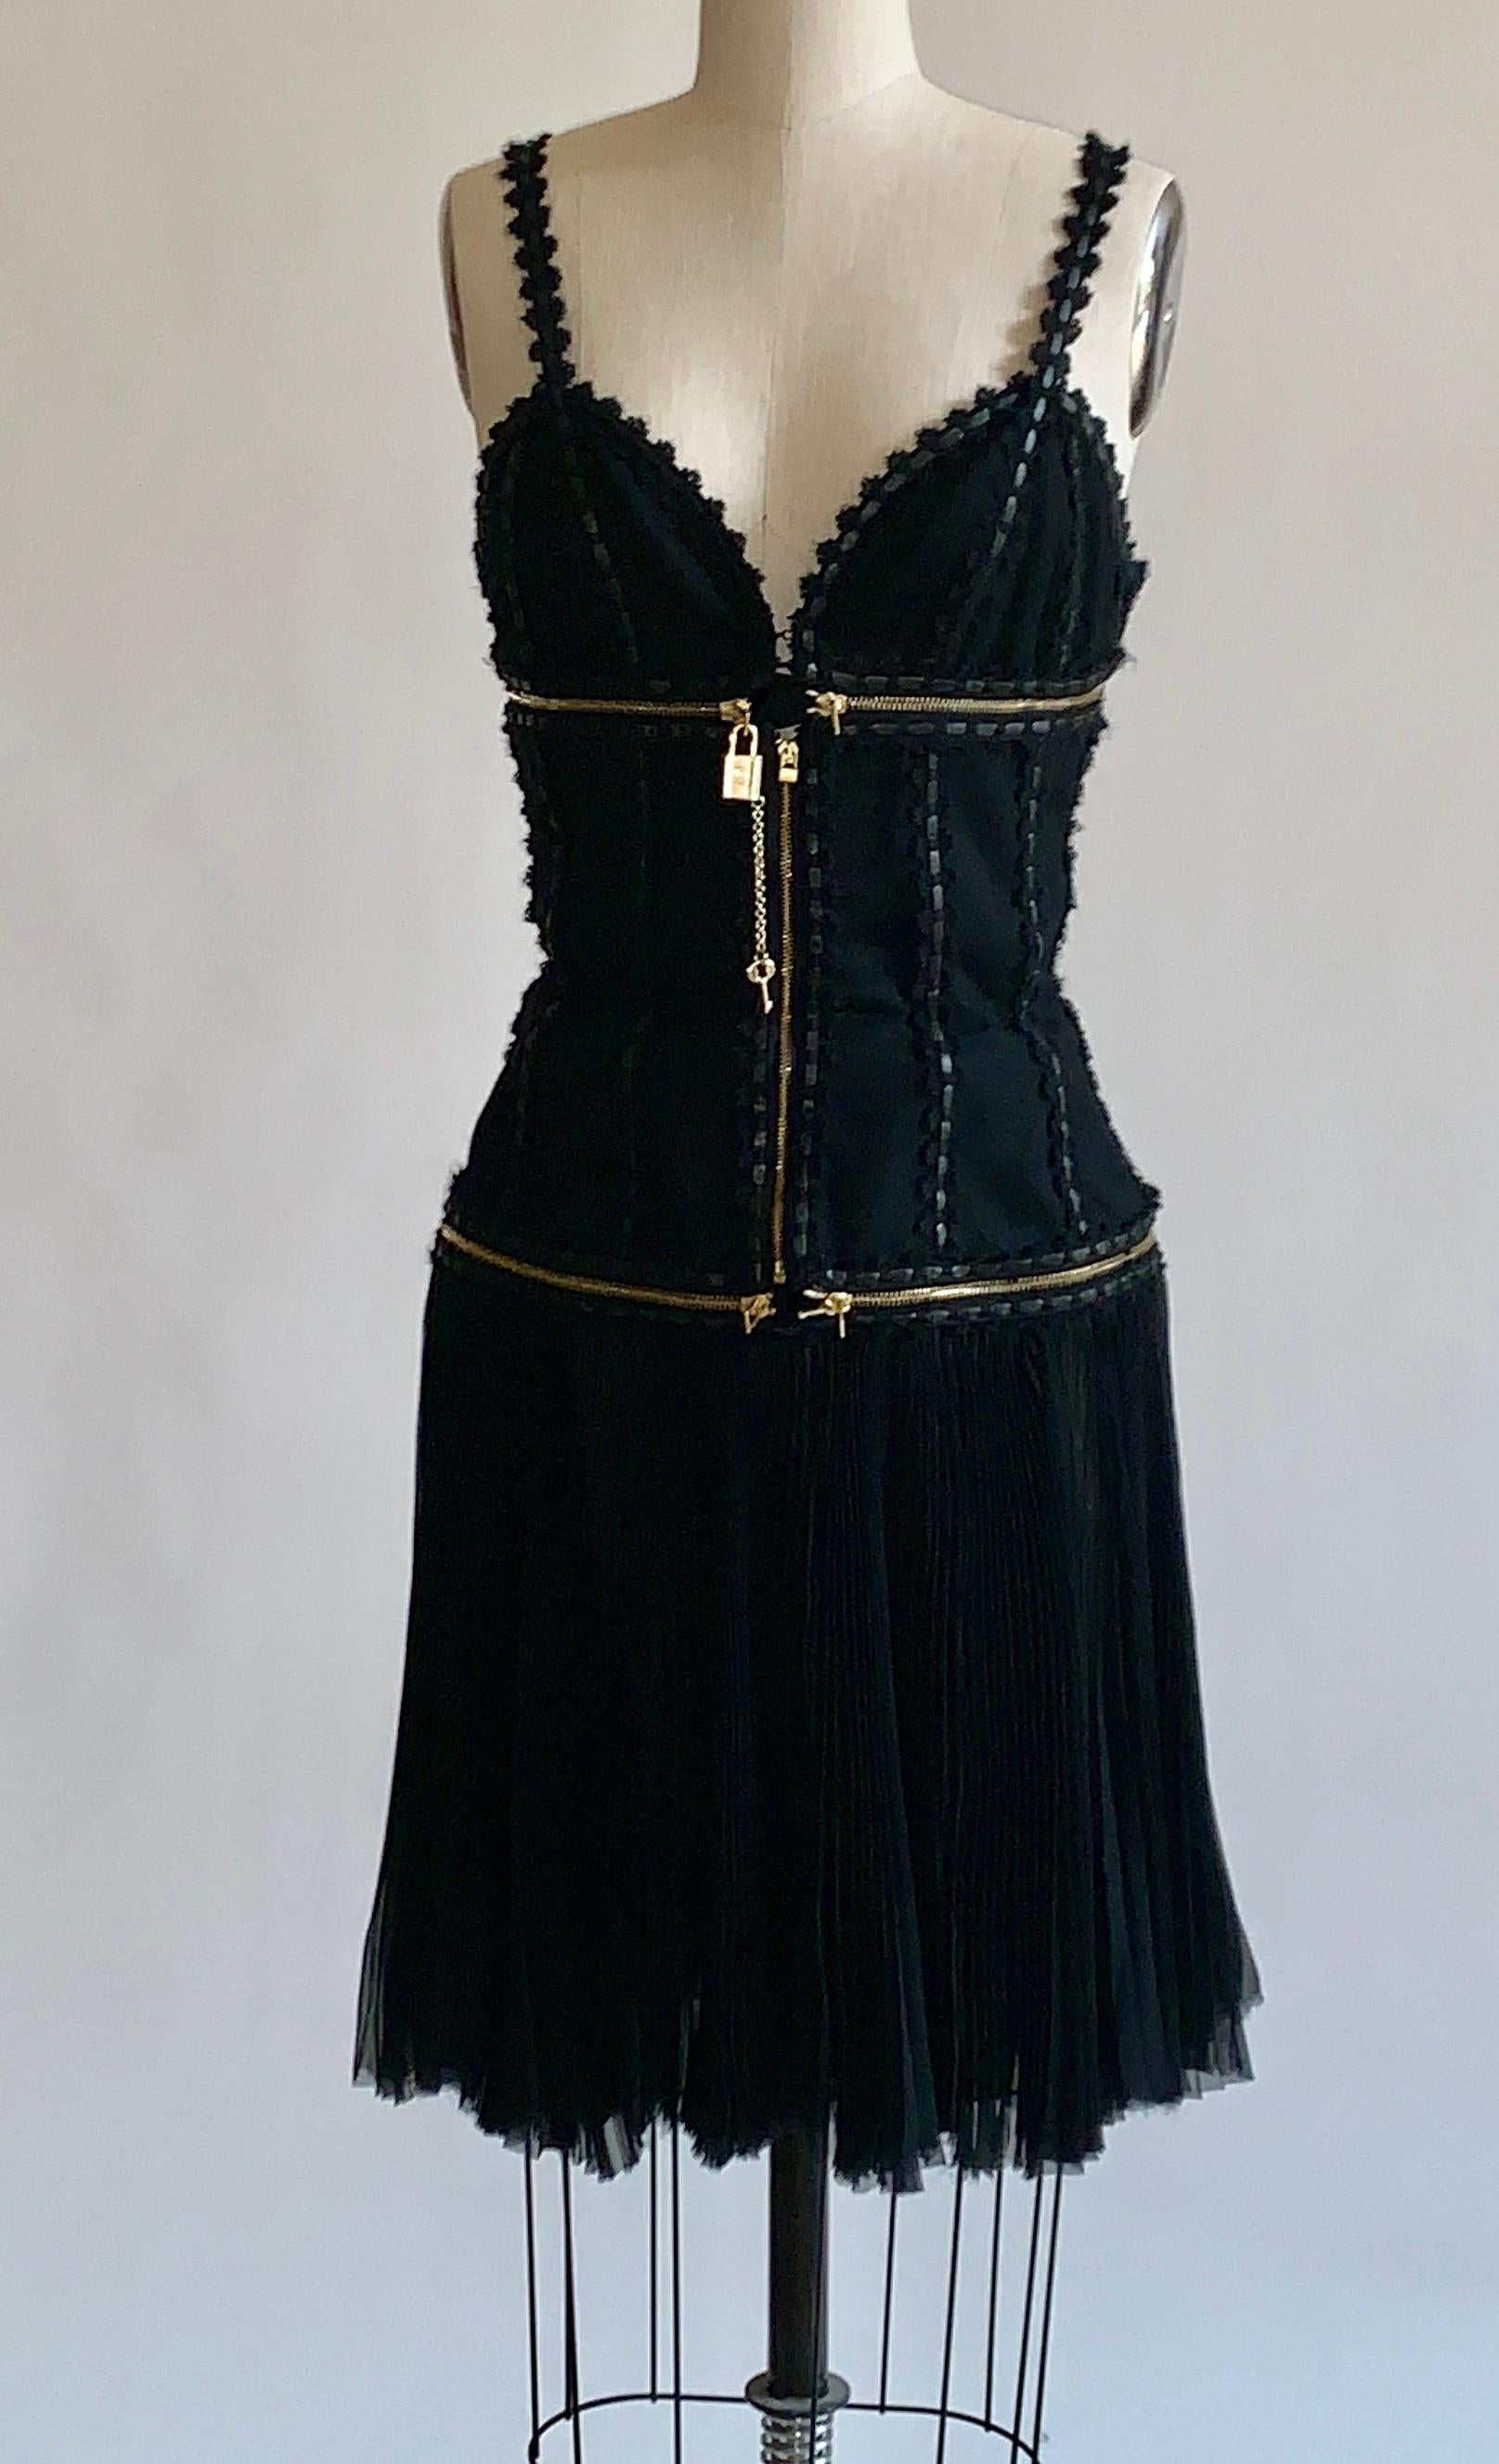 Alexander McQueen 2003 black wool and silk convertible dress (you can zip skirt off to make a corset style top, or zip again to create a bralette top) with a key and lock accent, zipper detailing and a crochet-like and leather trim throughout.